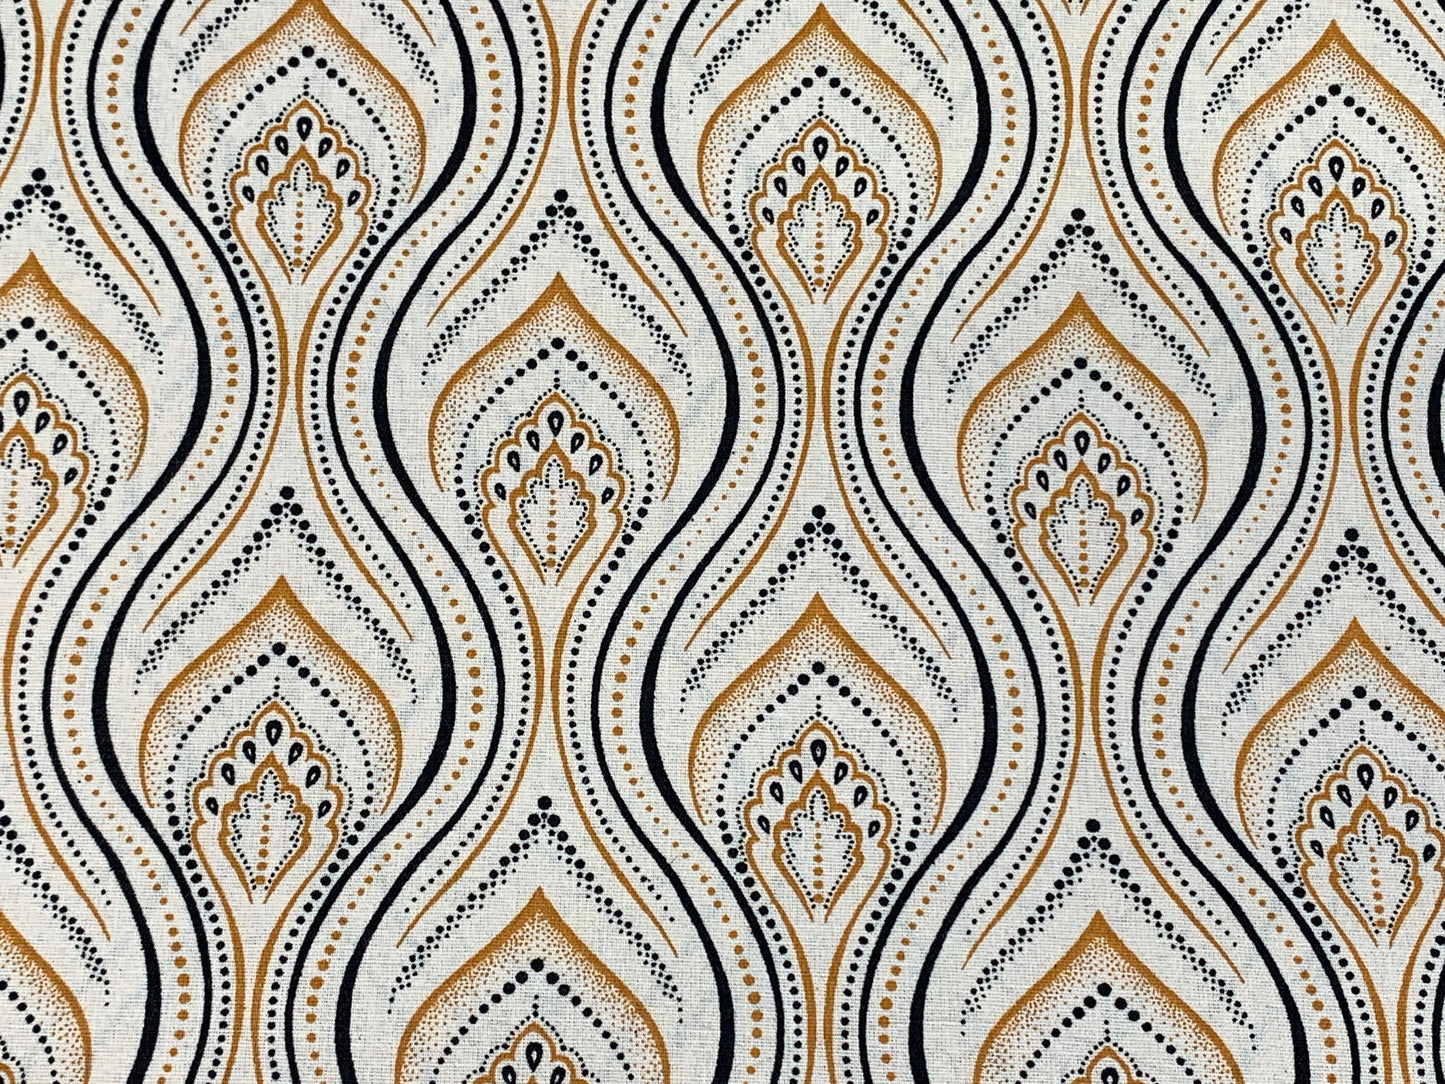 South African Shweshwe Fabric by the YARD. DaGama Three Cats Minarets Peaches & Cream. Cotton Fabric for Quilting, Apparel, Home Decor.